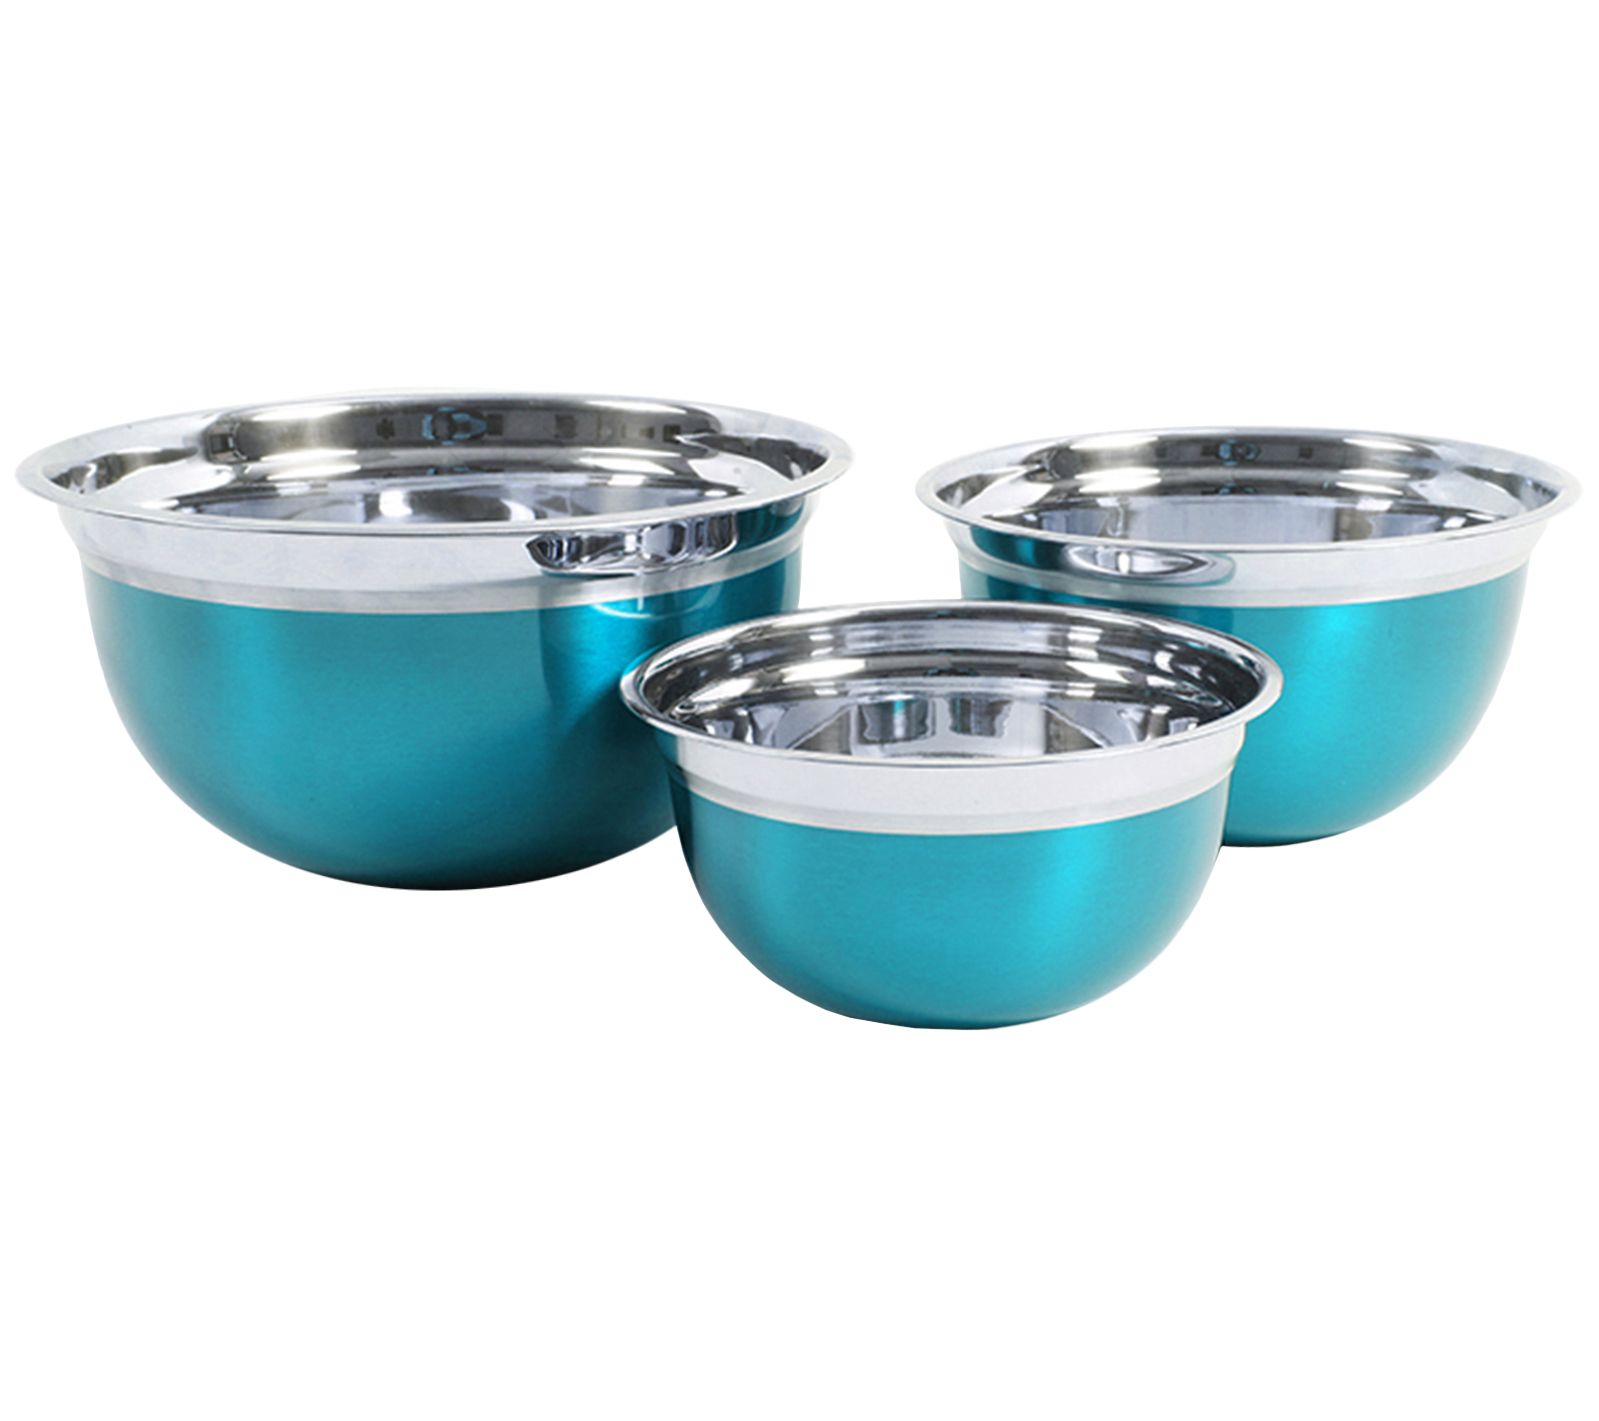 OXO Good Grips 3-Piece Stainless Steel Insulated Mixing Bowl Set & Reviews